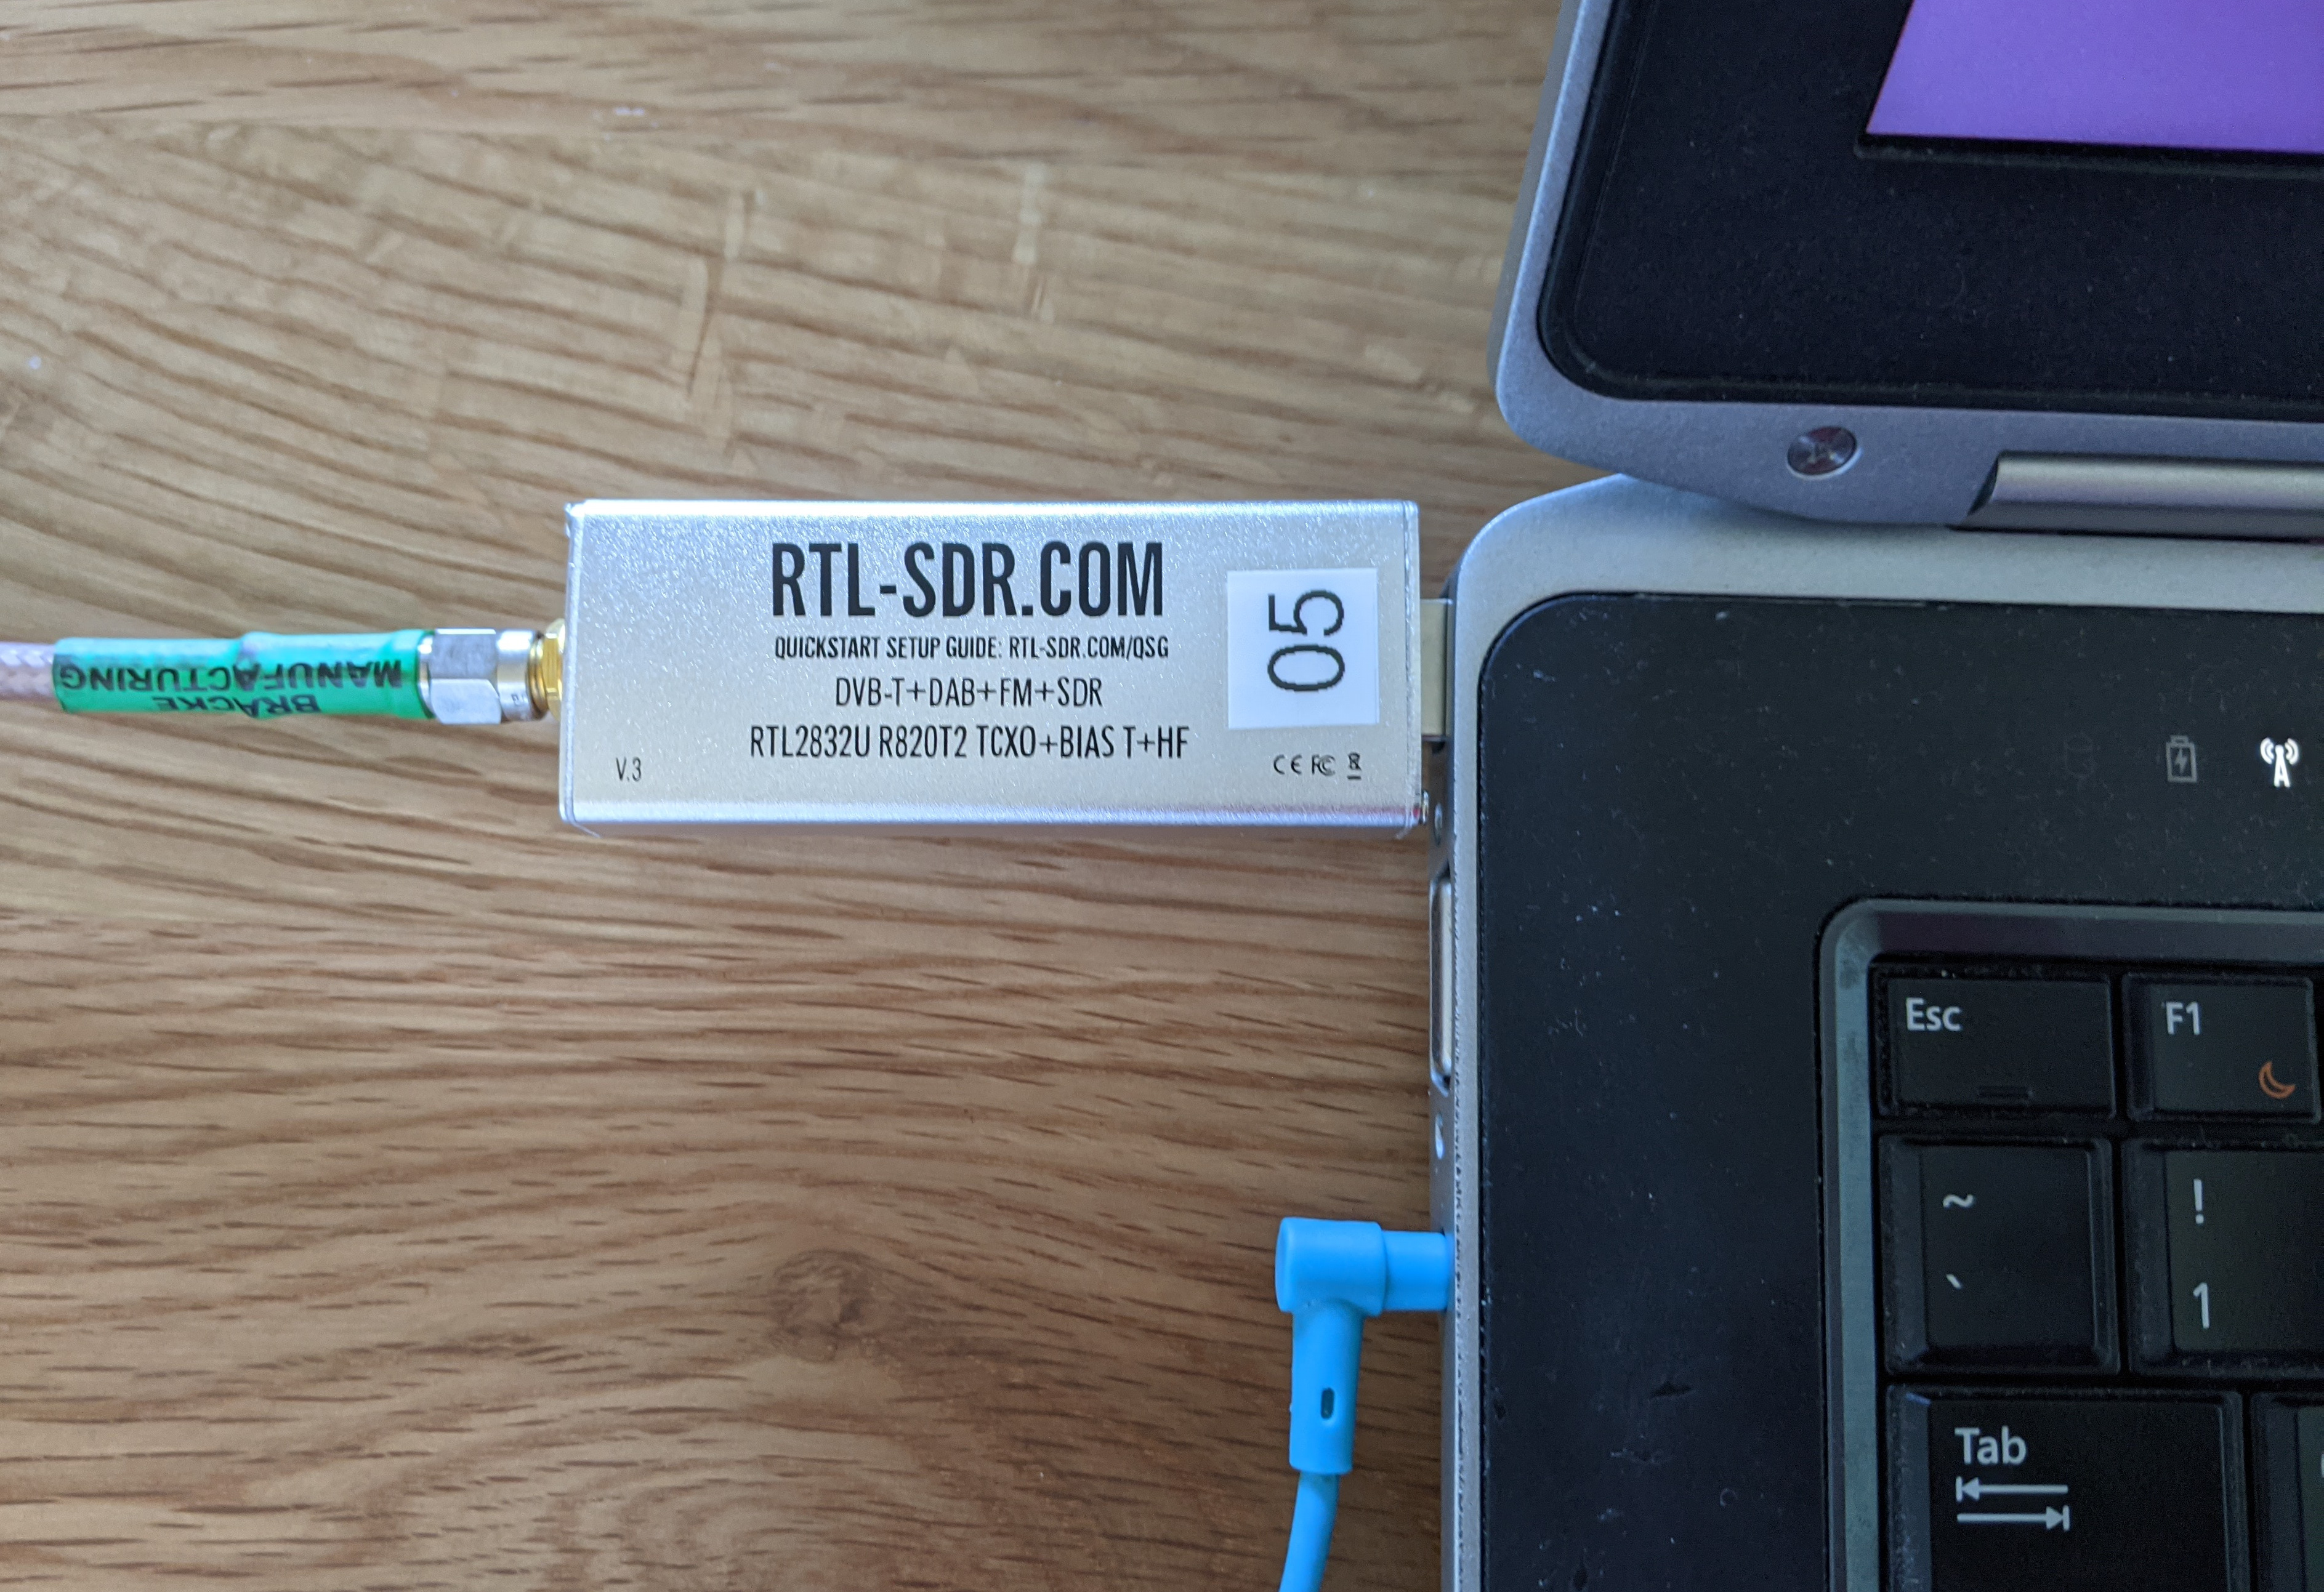 RTL-SDR: Does it really work? - Making It Up